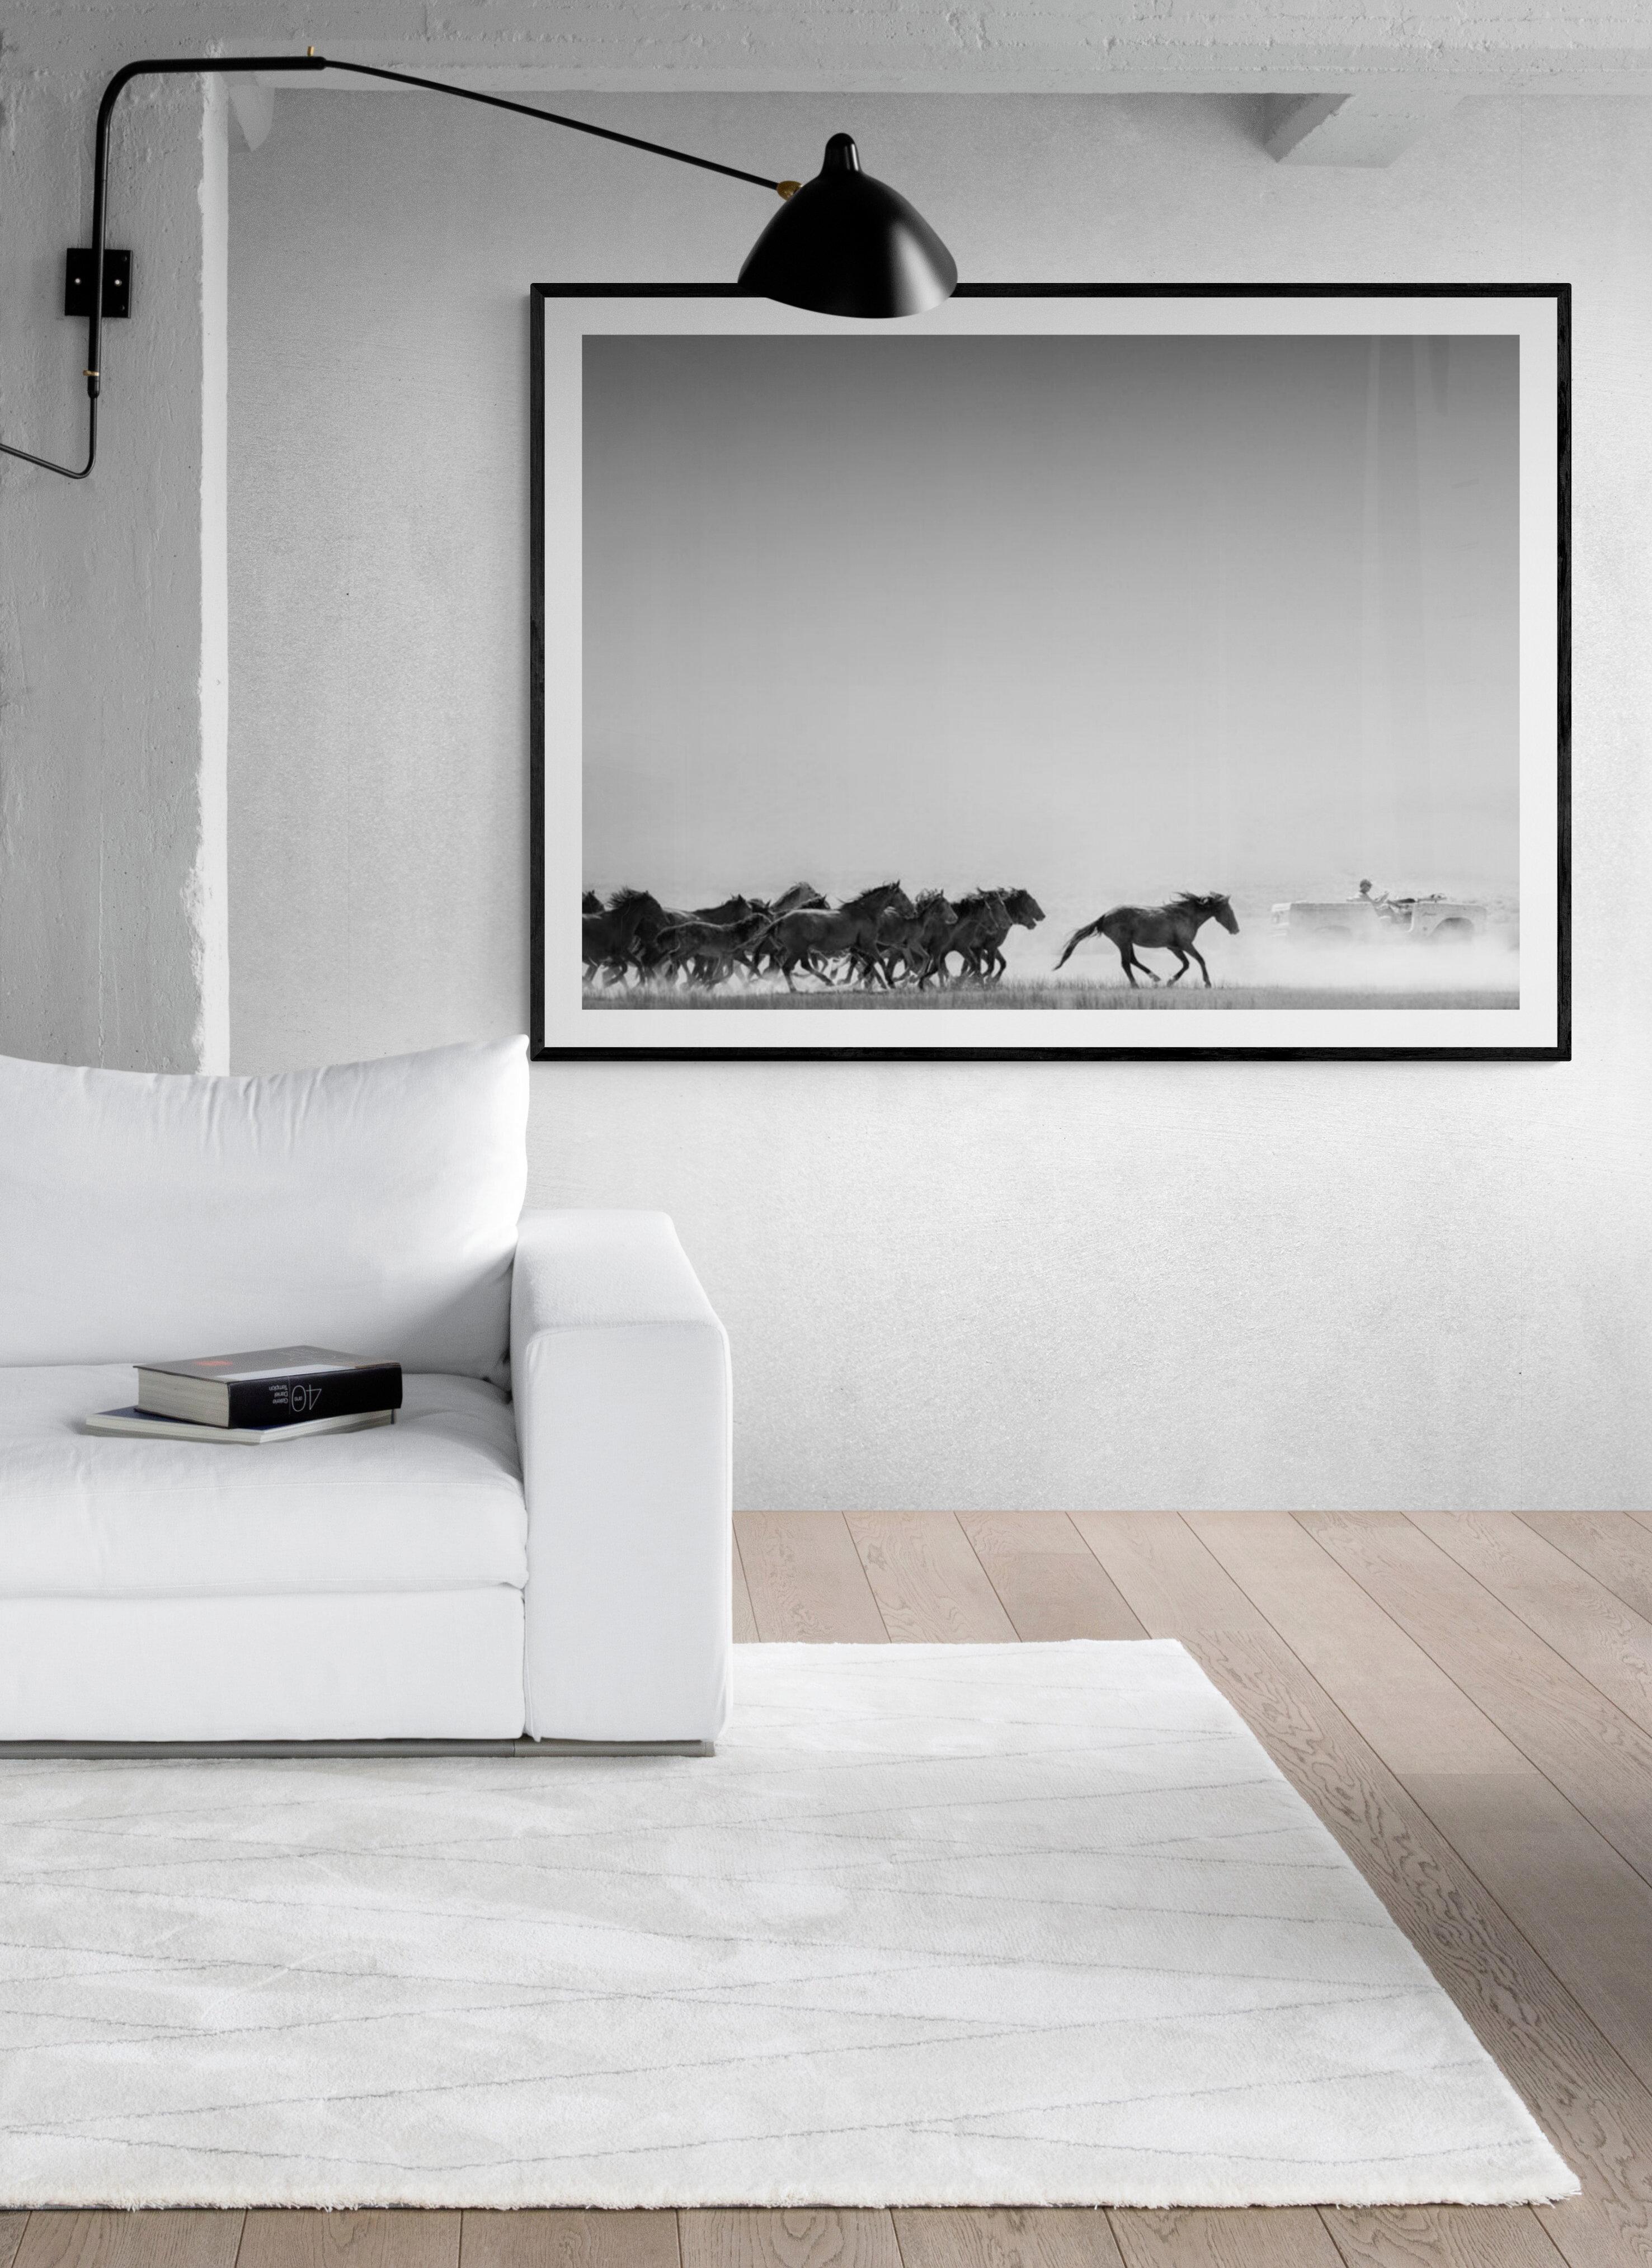 AMERICAN HORSE POWER 28x40 Photography Wild Horses Mustangs FORD BRONCO ICON - Print by Shane Russeck